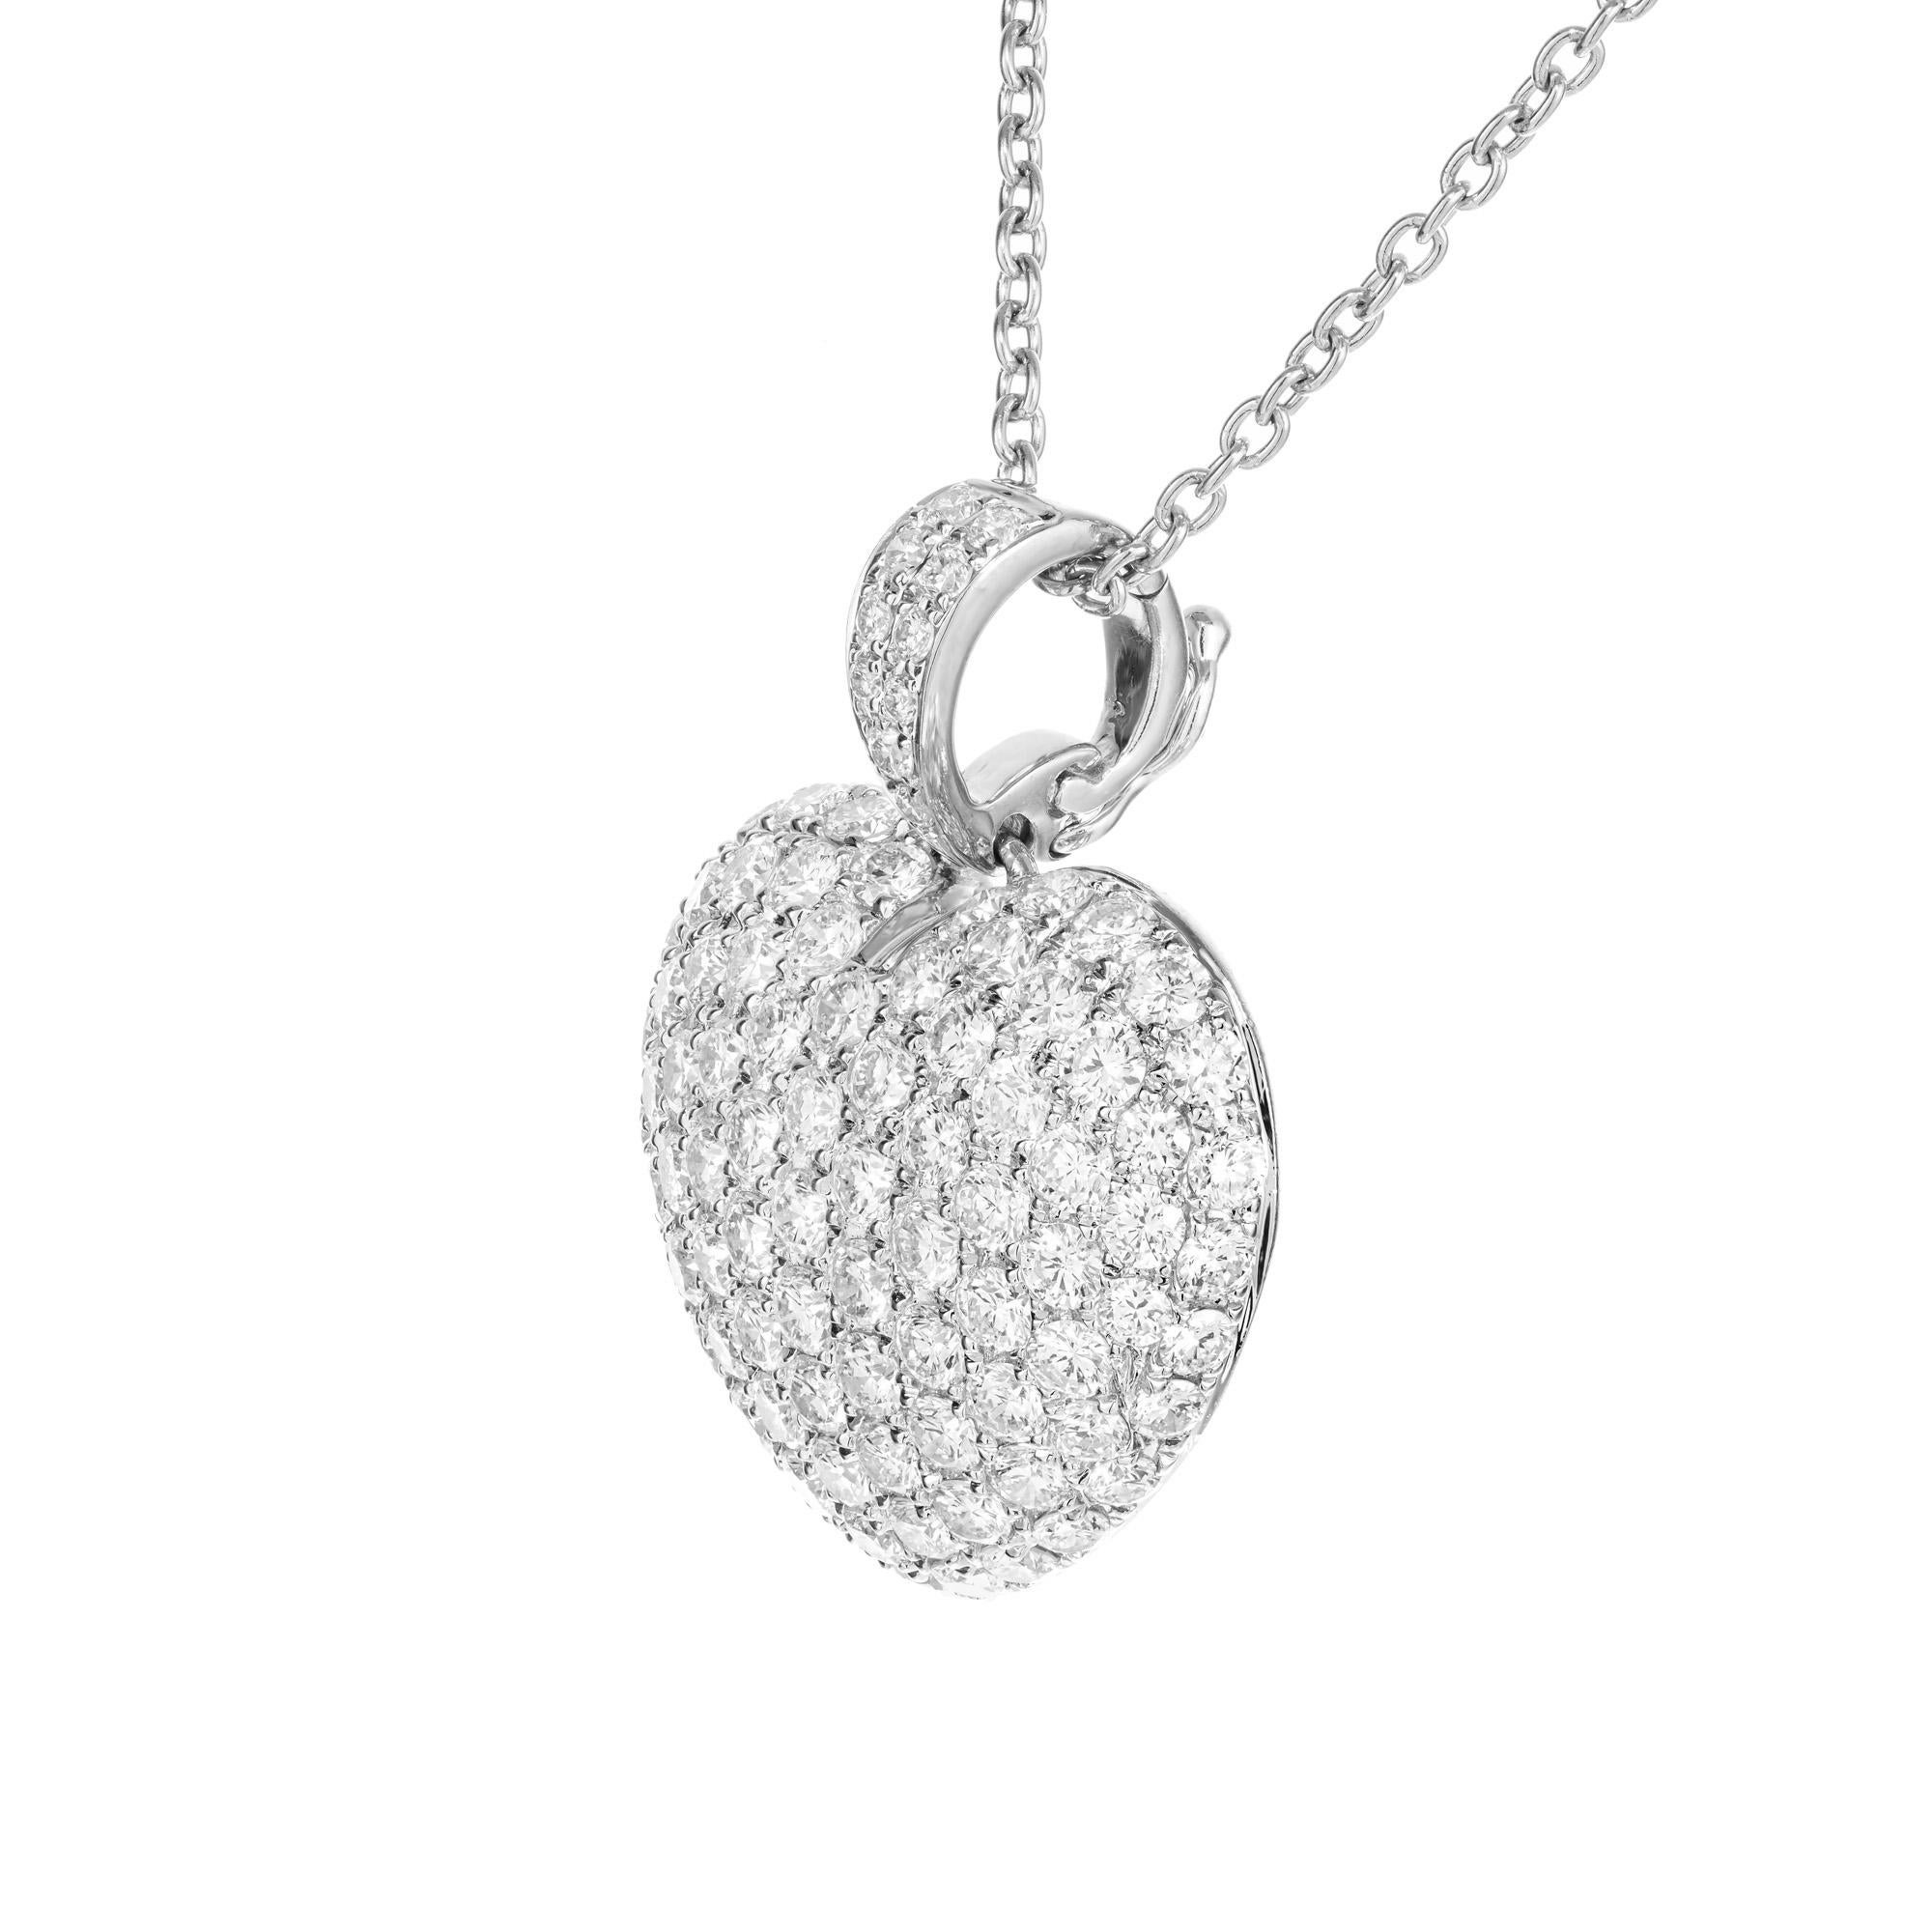 Puffed pave diamond heart pendant necklace. 100 round brilliant cut pave diamonds, set in a platinum domed heart shaped setting. 16 inch platinum chain. 
100 round brilliant cut diamonds, F-G VS approx. 2.00cts
Platinum 
Stamped: PT950
7.4 grams
Top